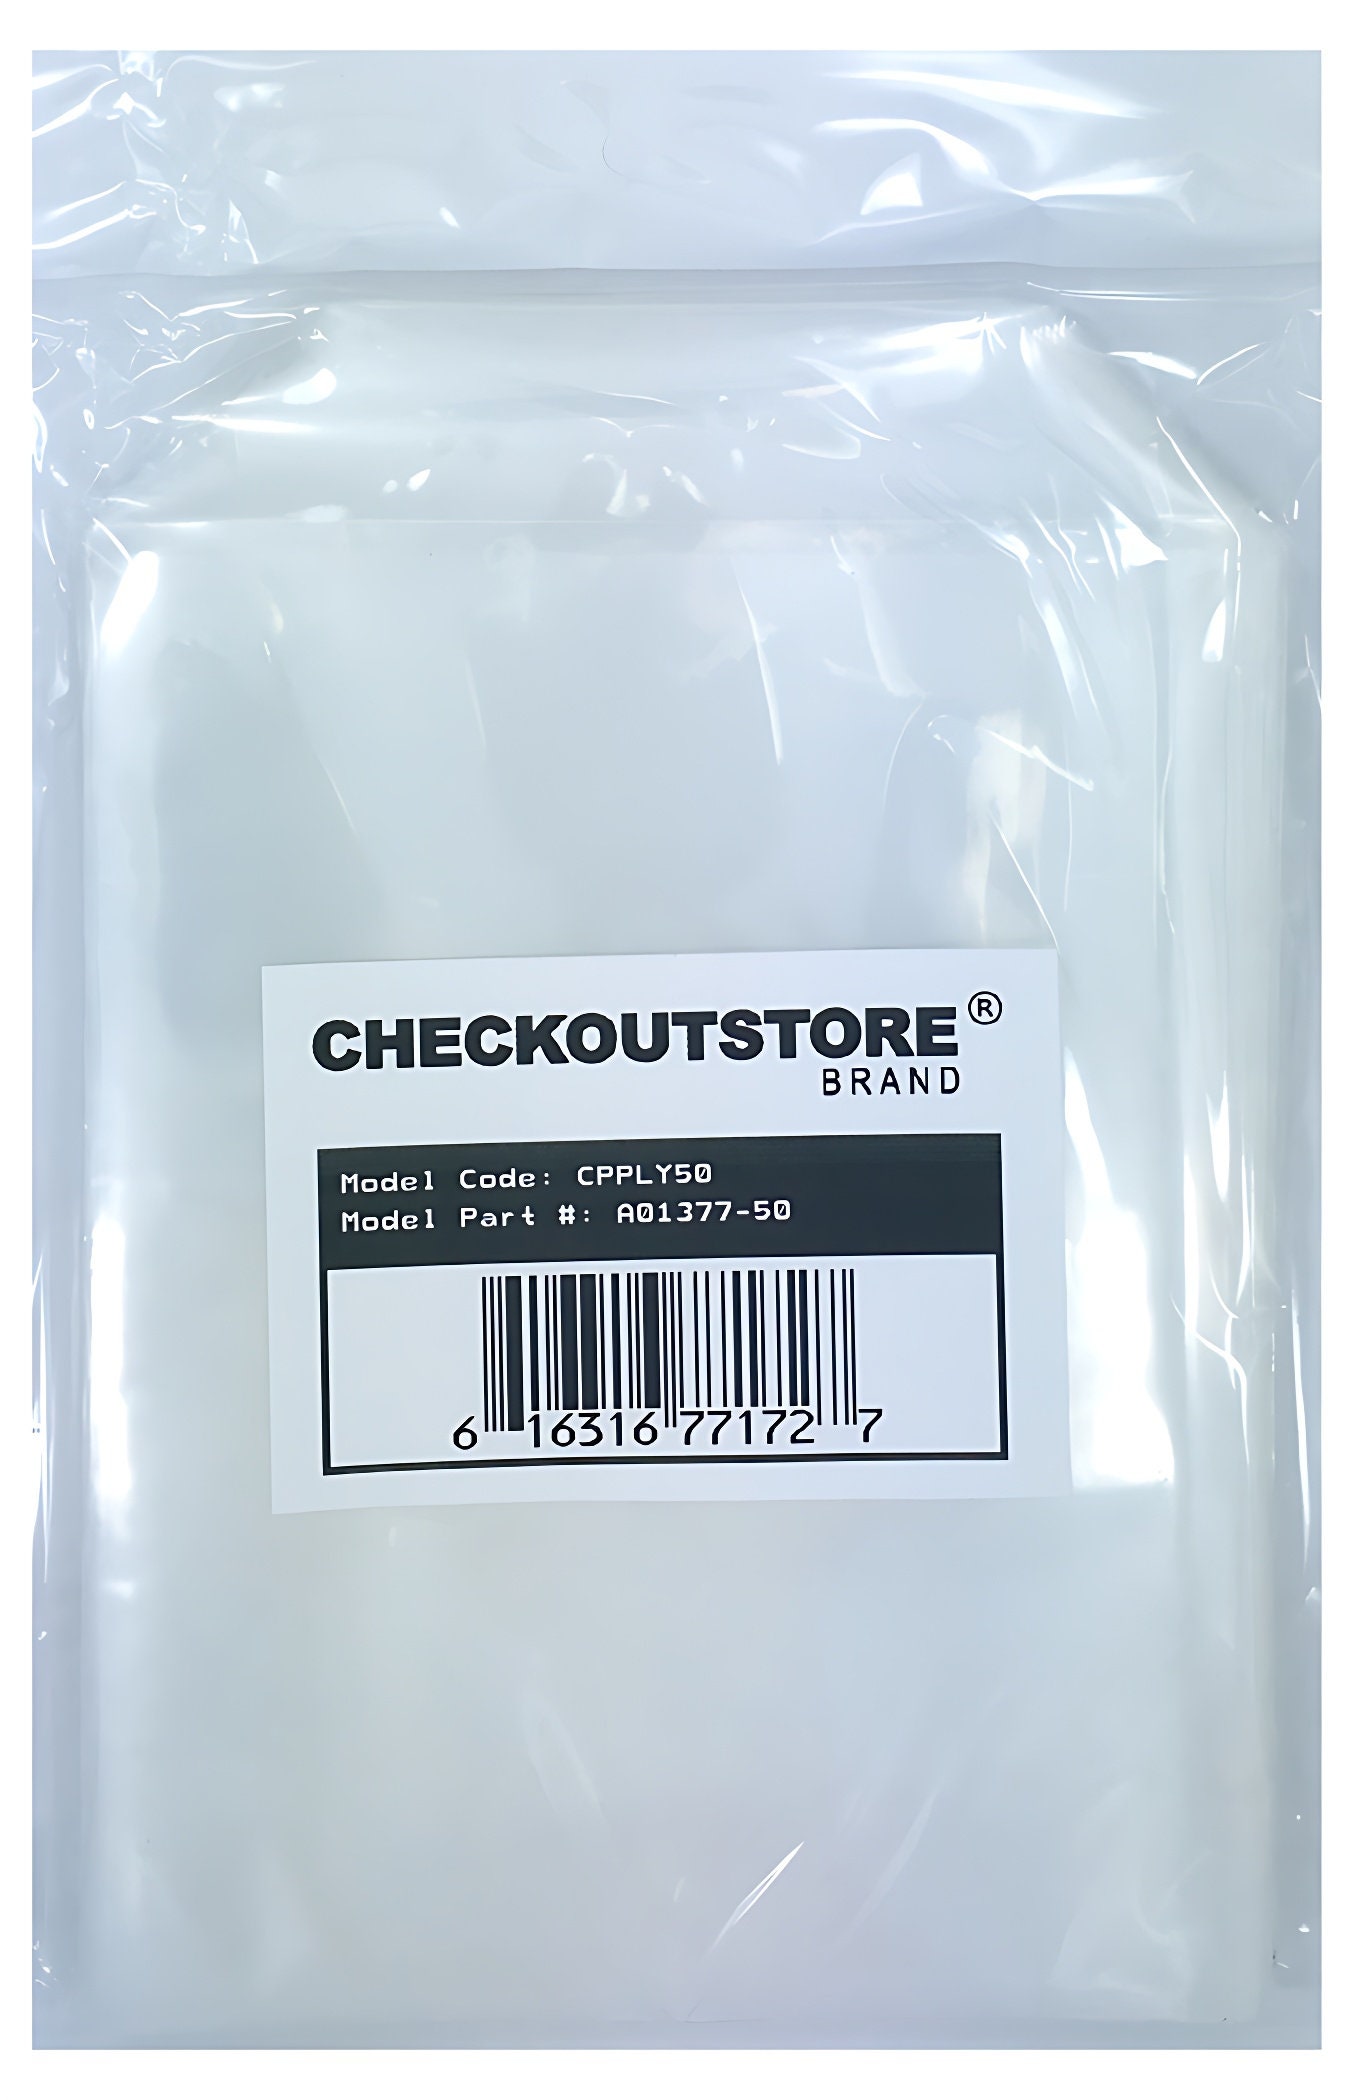 CheckOutStore White Non Woven Storage Sleeves for 12x12 Cardstock Pape –